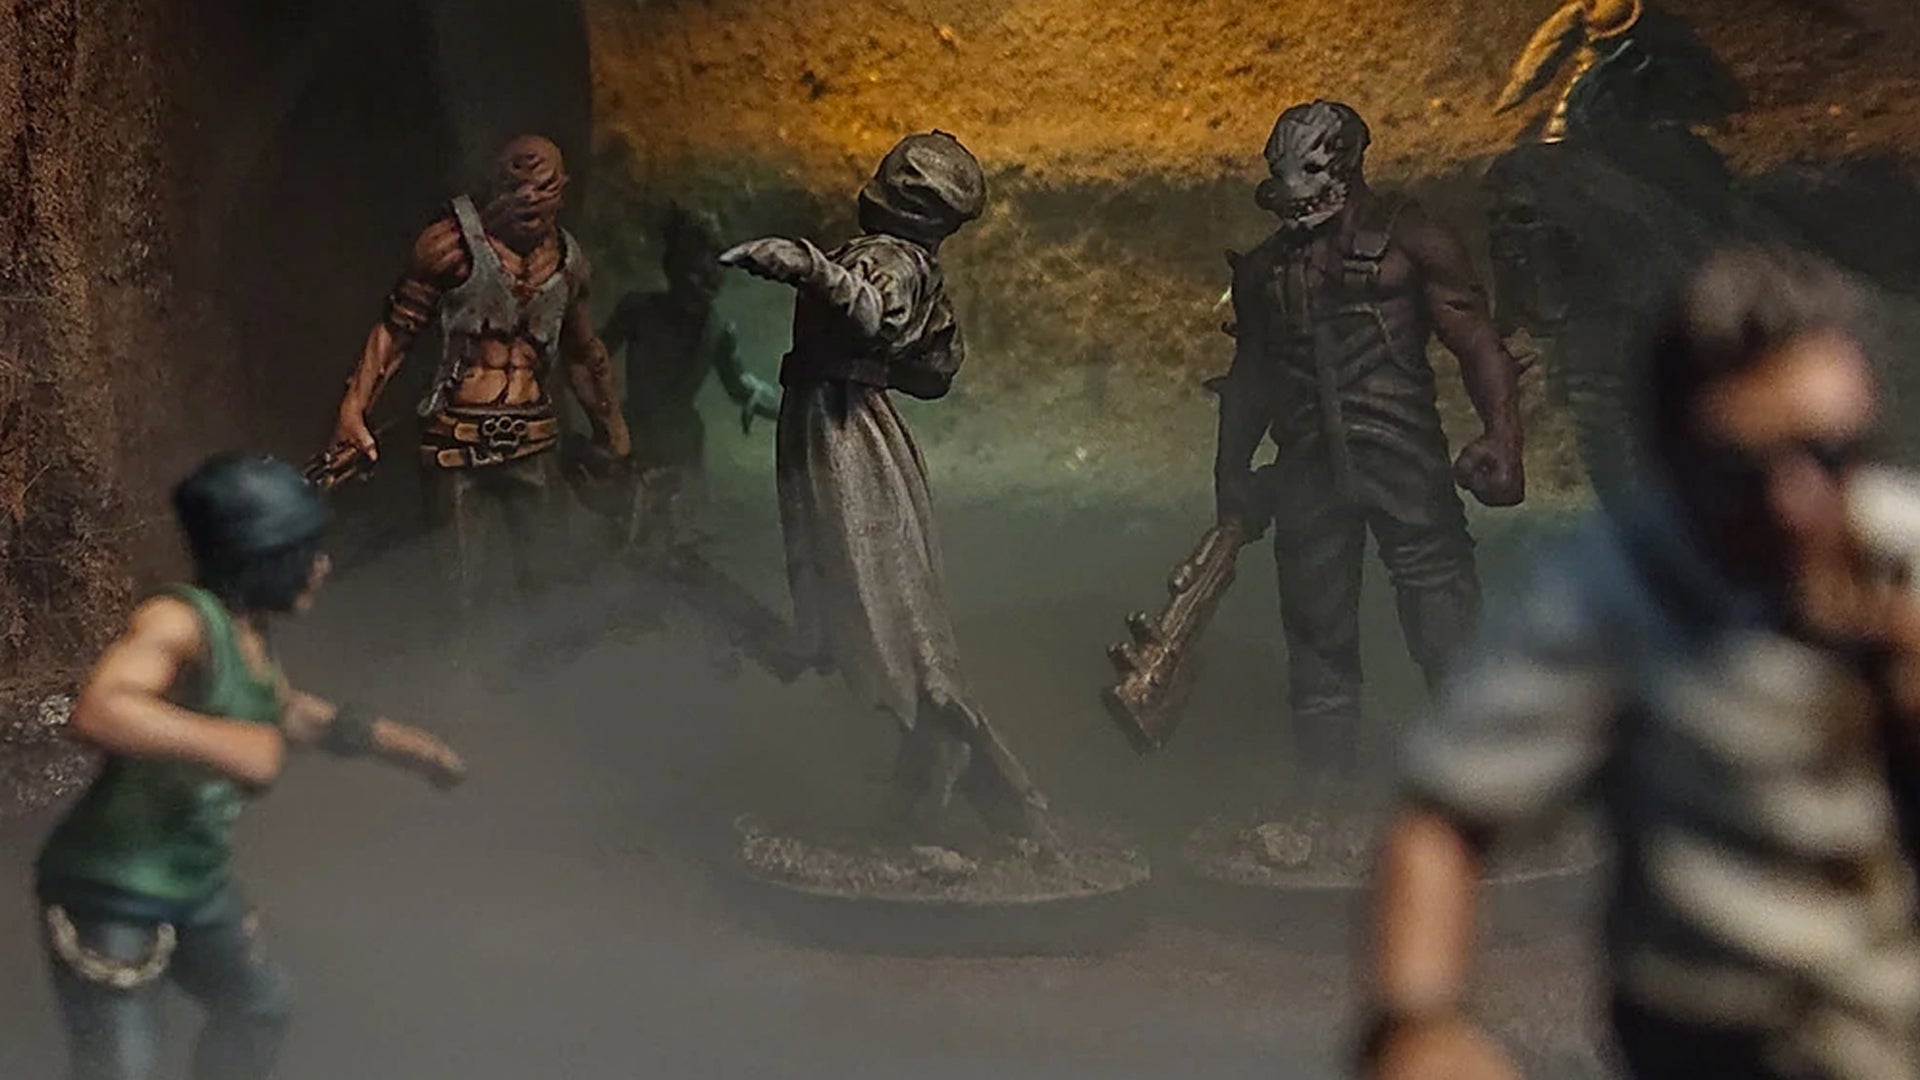 Dead by Daylight board game nearly had a legacy campaign mode